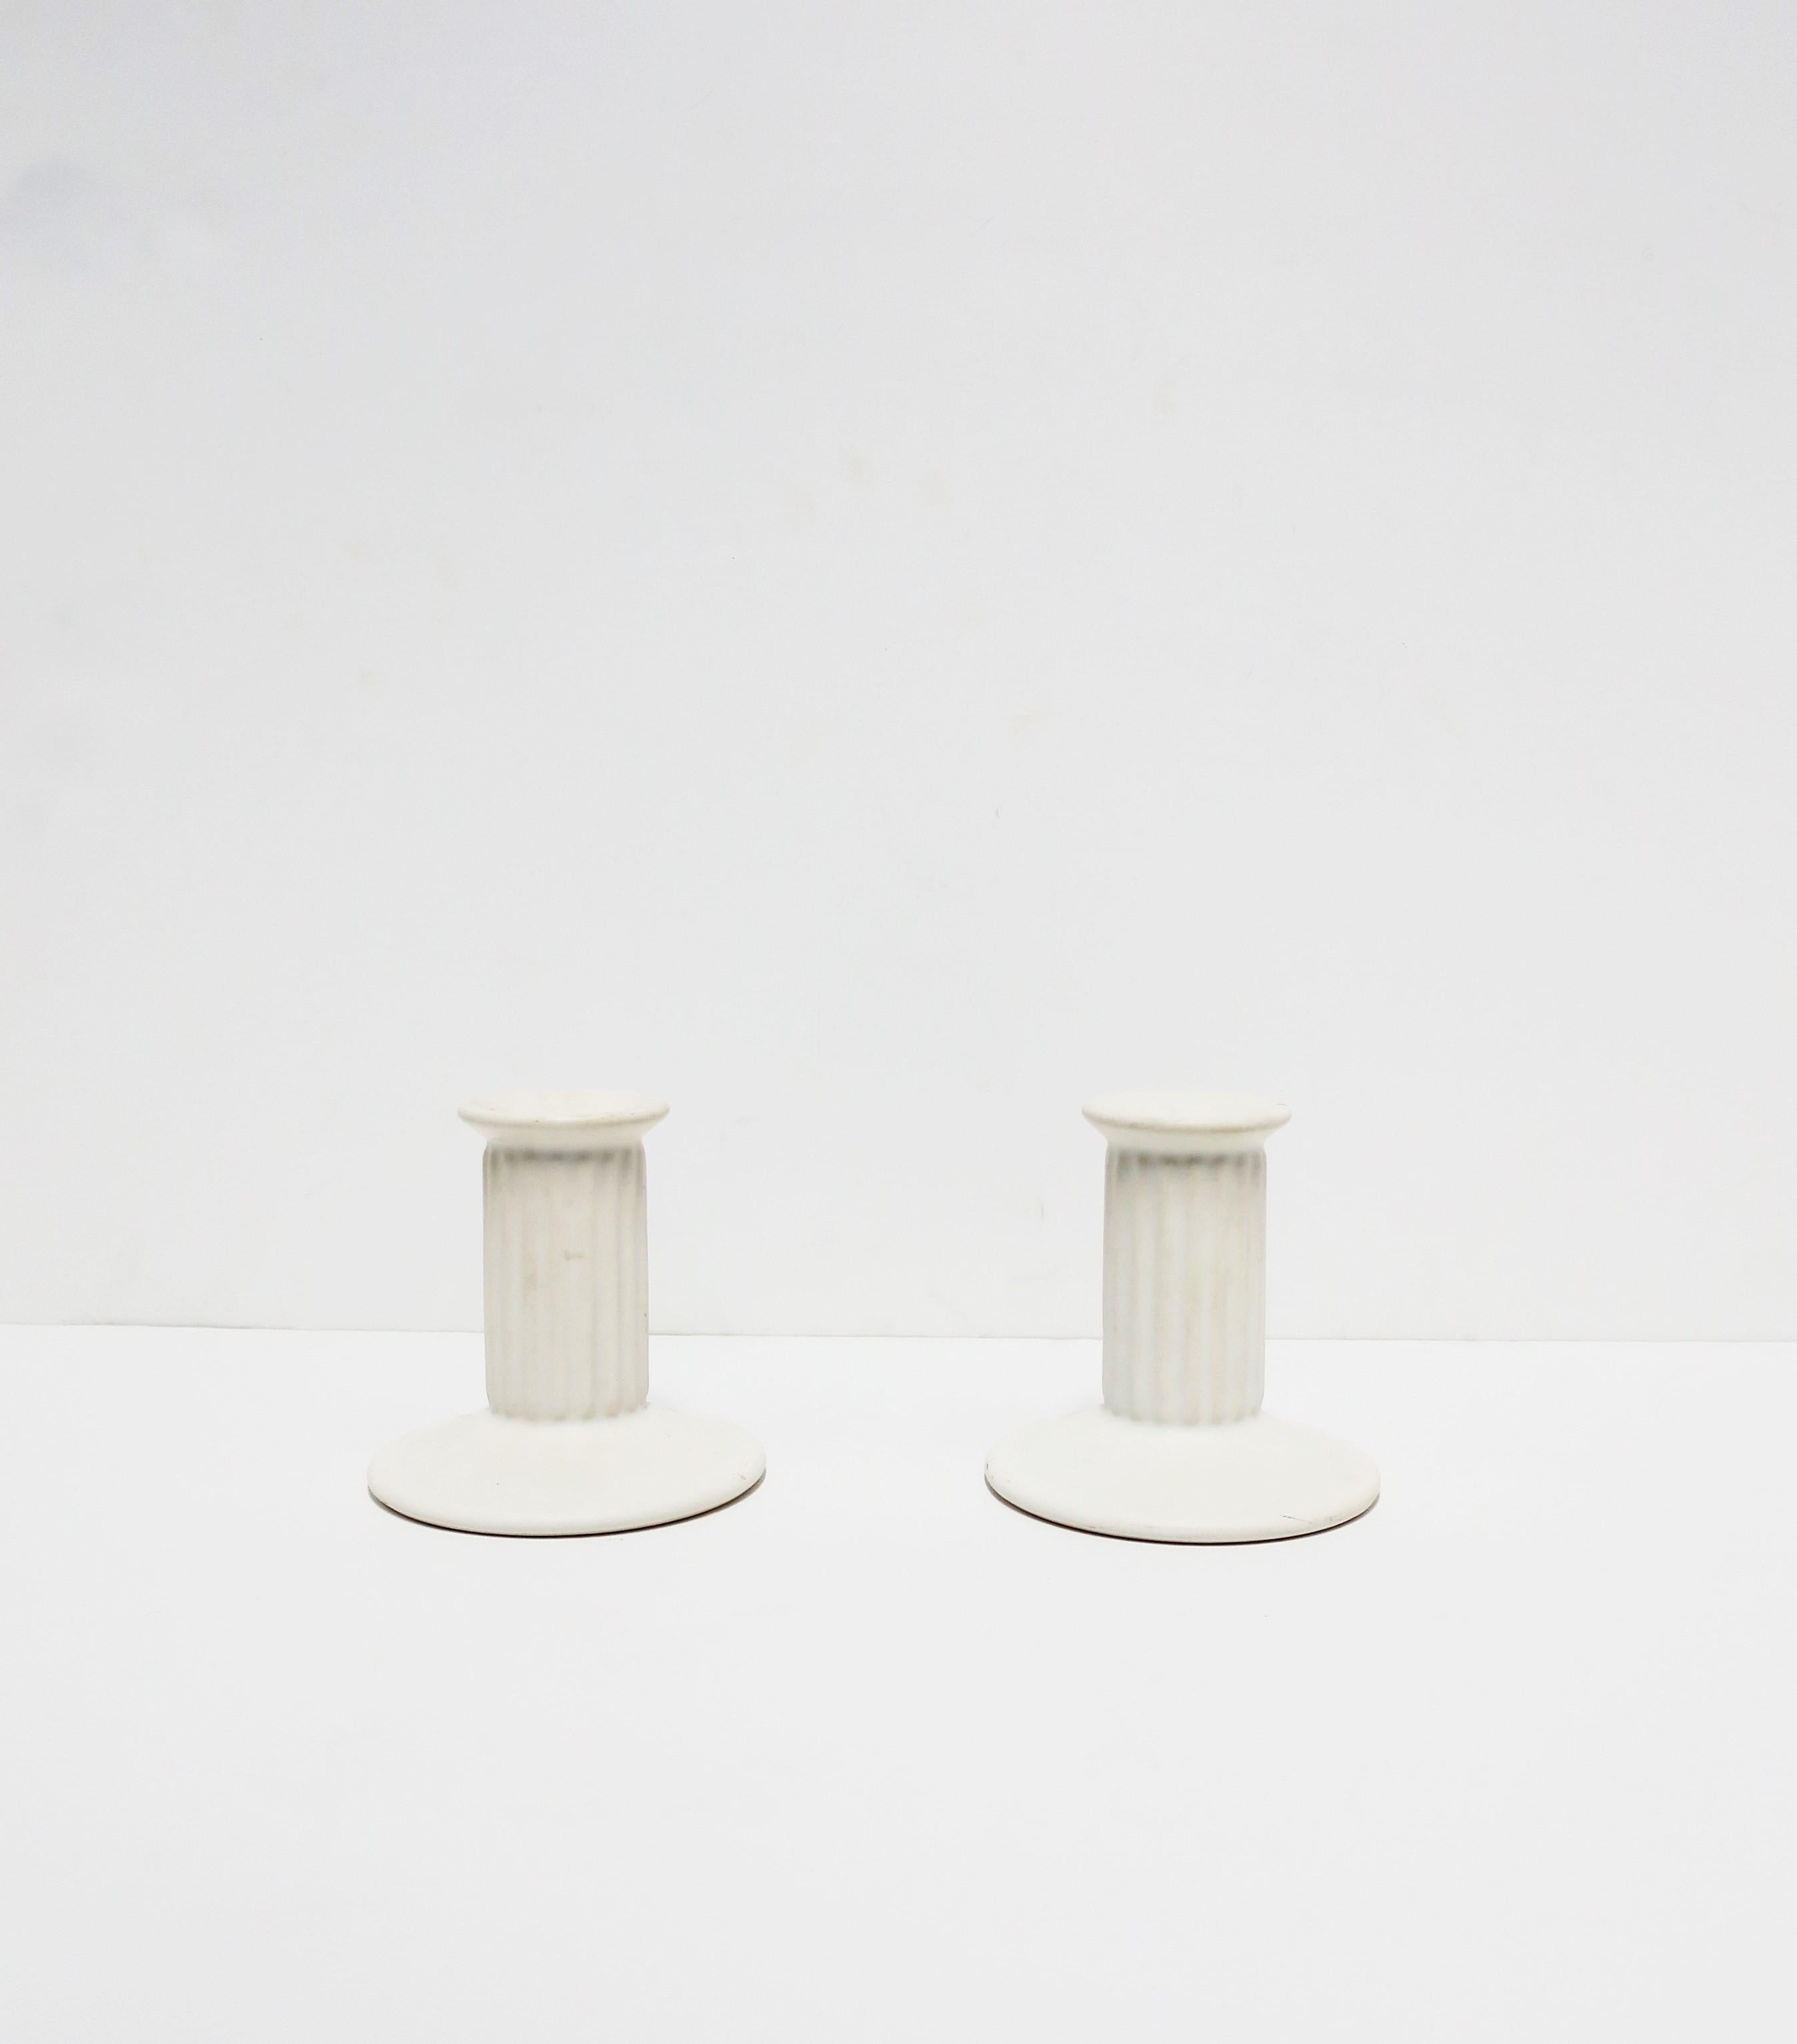 A vintage pair of white ceramic matte 'column' candlestick holders in the Neoclassical style, circa 1960s-1970s. Made in Portugal. Both marked on bottom as shown in last image. Dimensions: 4.5